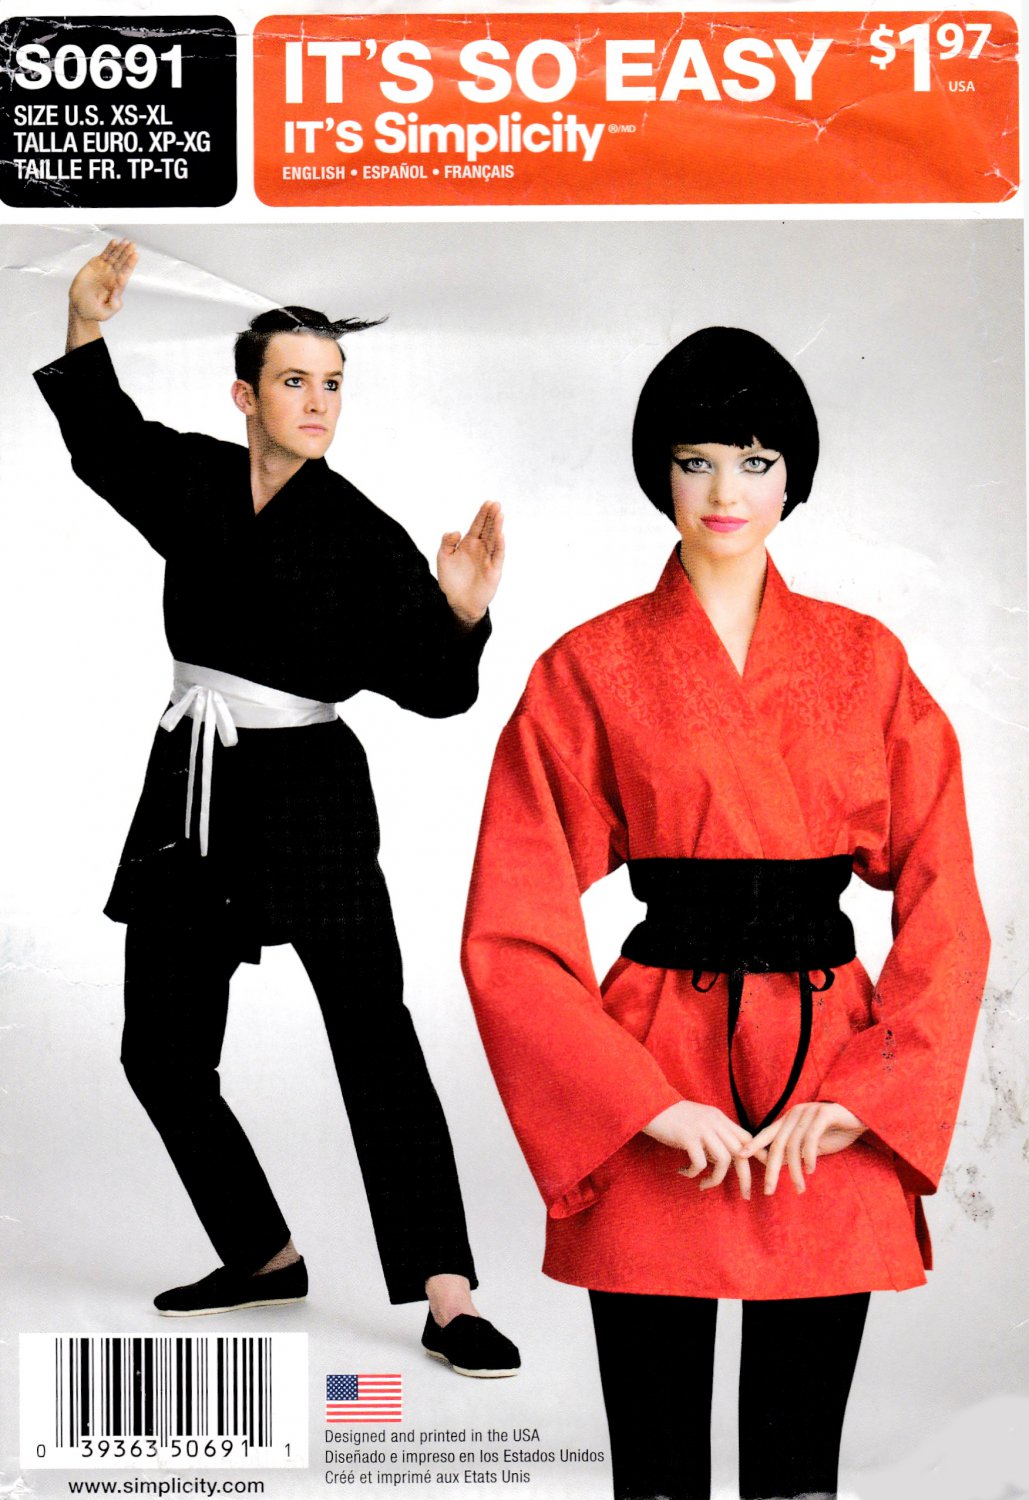 Simplicity S0691 Misses Mens Teens Sewing Pattern for Martial Arts Tunic and Belt Sizes XS - XL